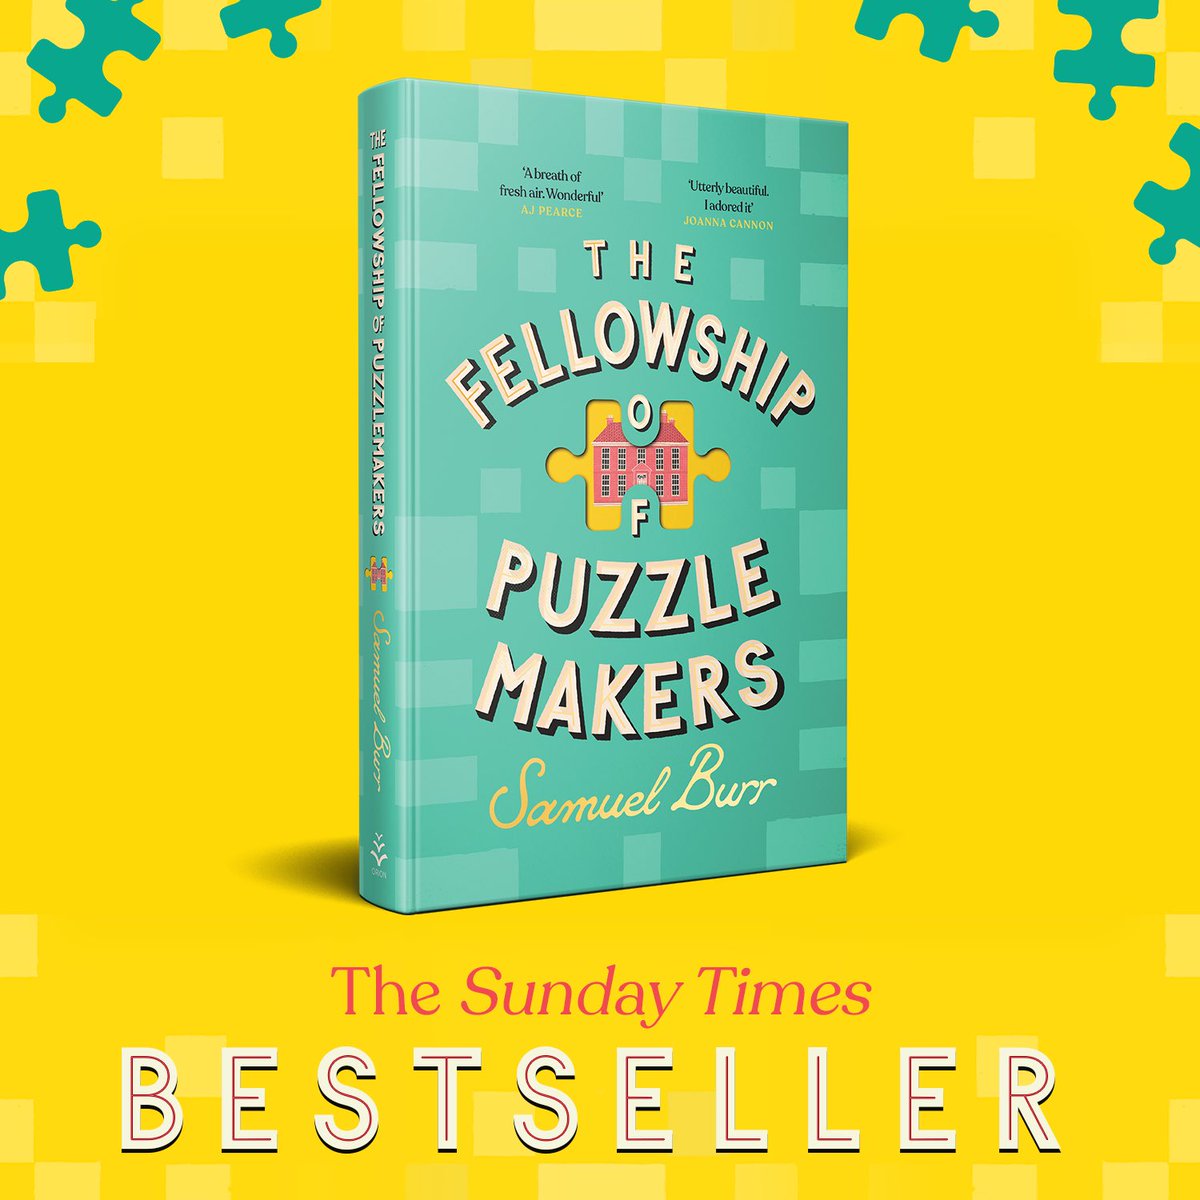 Typing this through tears. 🥲 I’m so proud to announce that #Puzzlemakers is an instant Sunday Times Bestseller! Enormous thanks to my SPECTACULAR publishing team + agent, and to readers, booksellers and bloggers who have got behind this book in ways I could never imagine. ✨🧩💛